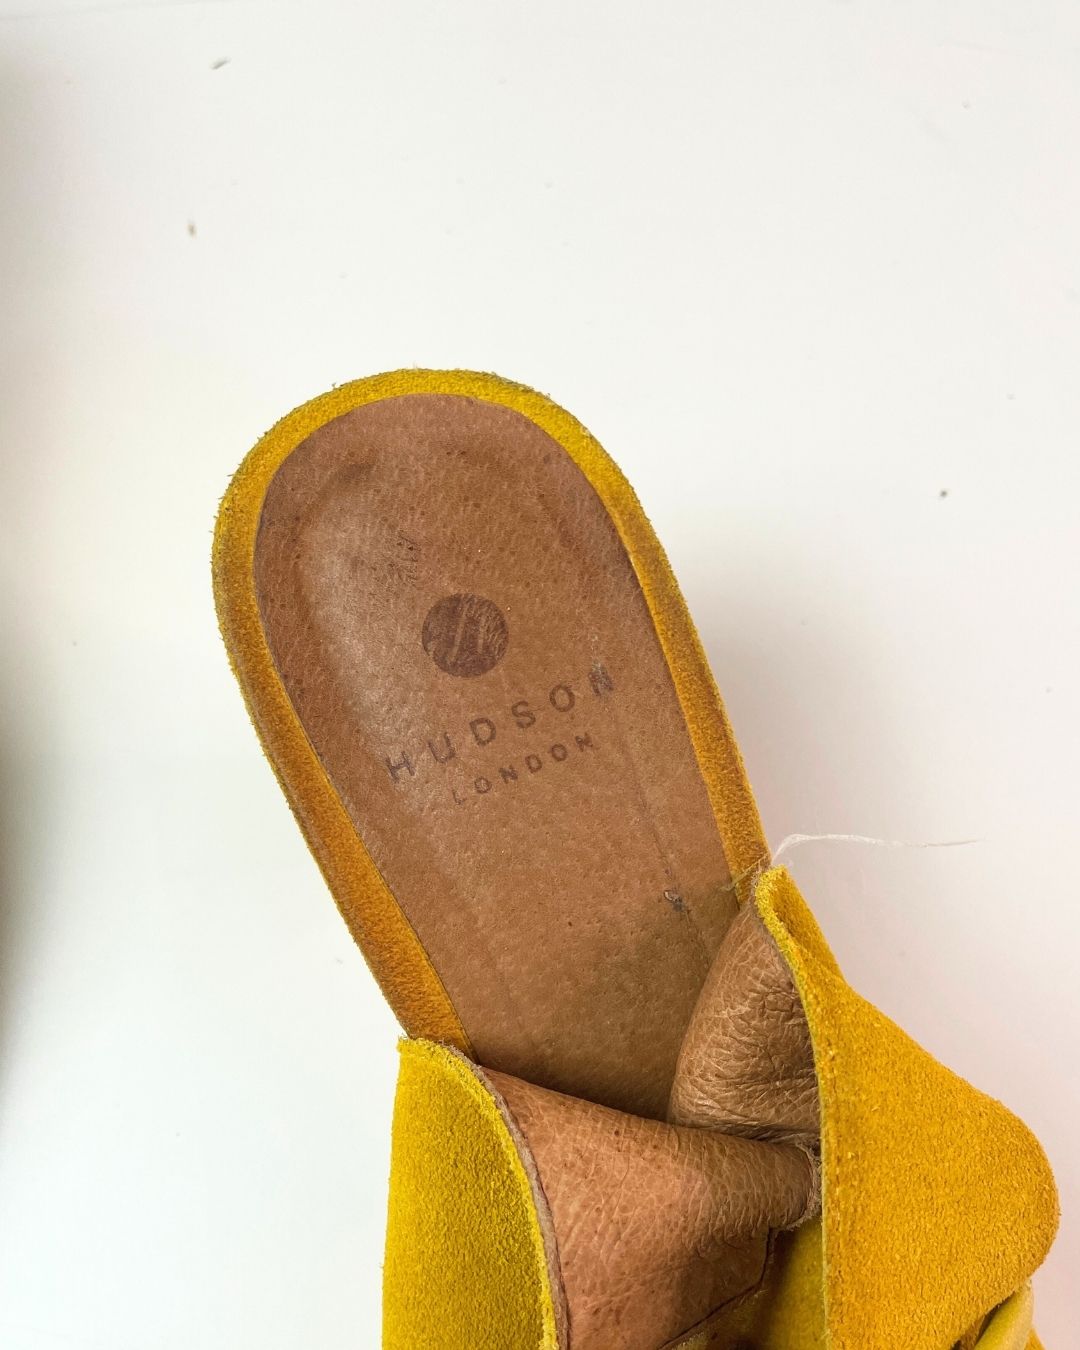 second hand Hudson Hudson Yellow Suedue Heels Size 6  25 OWNI